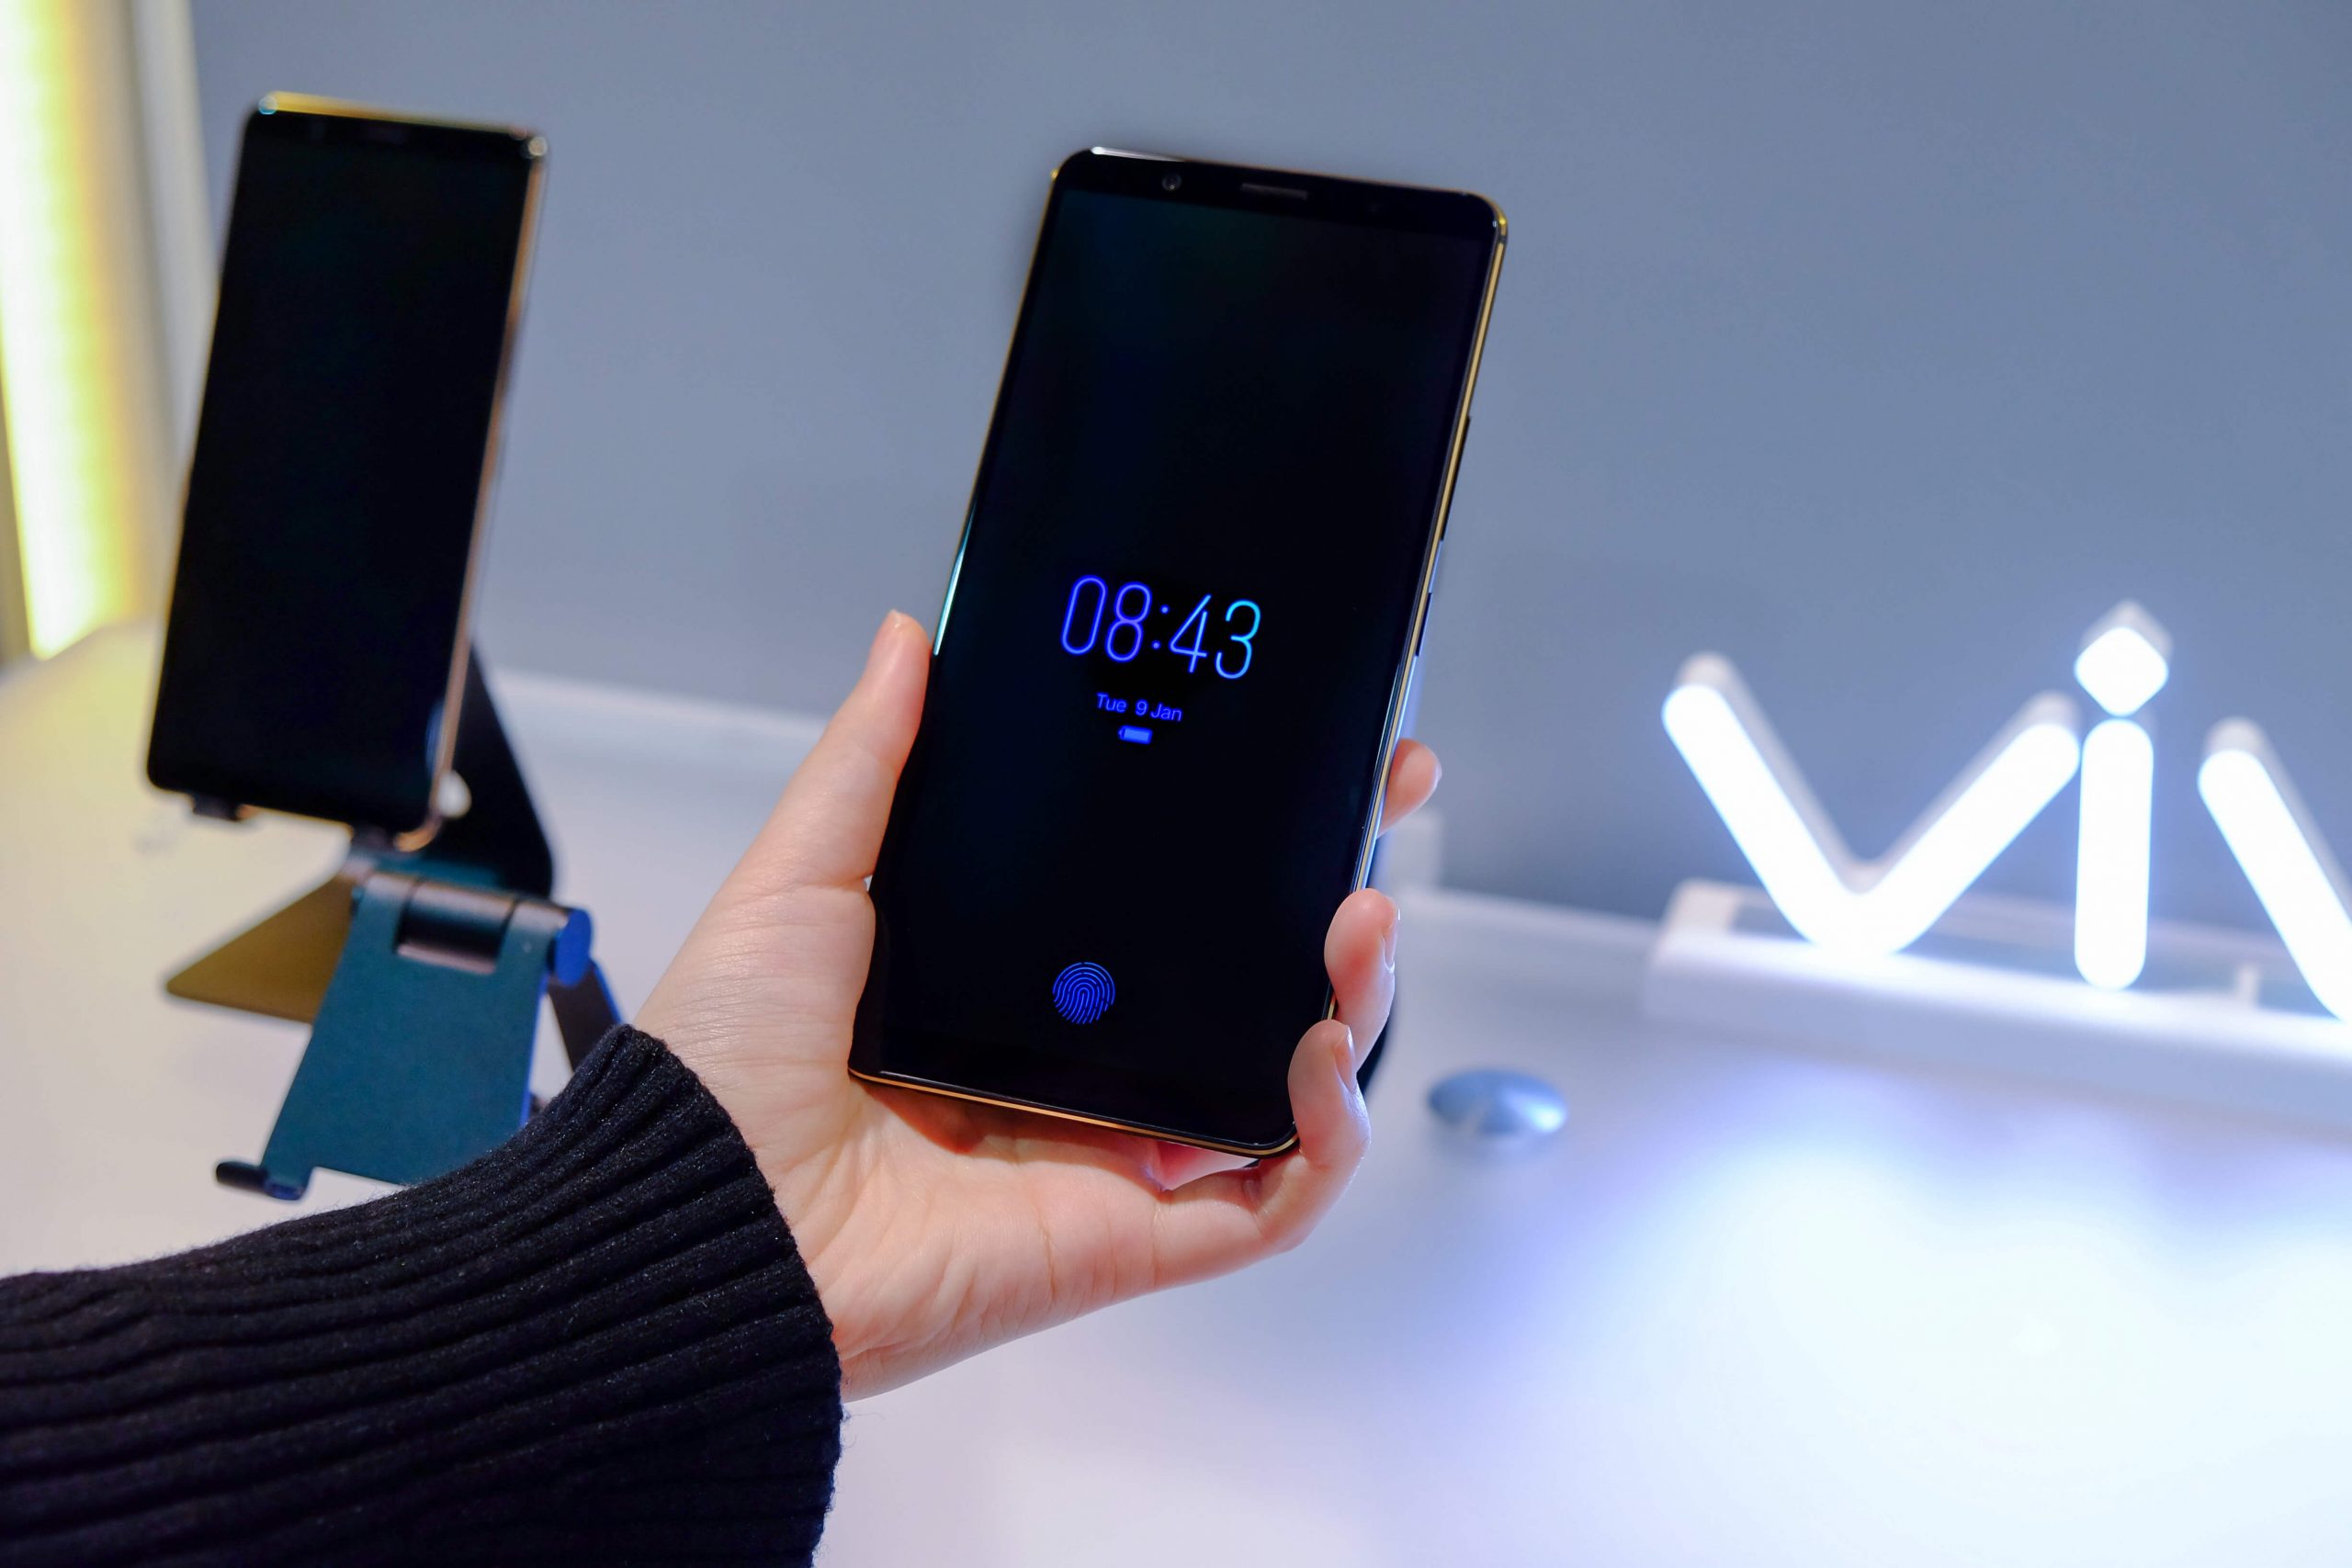 Vivo’s First Smartphone with In-Display Fingerprint Scanning is Now Ready for Mass Production